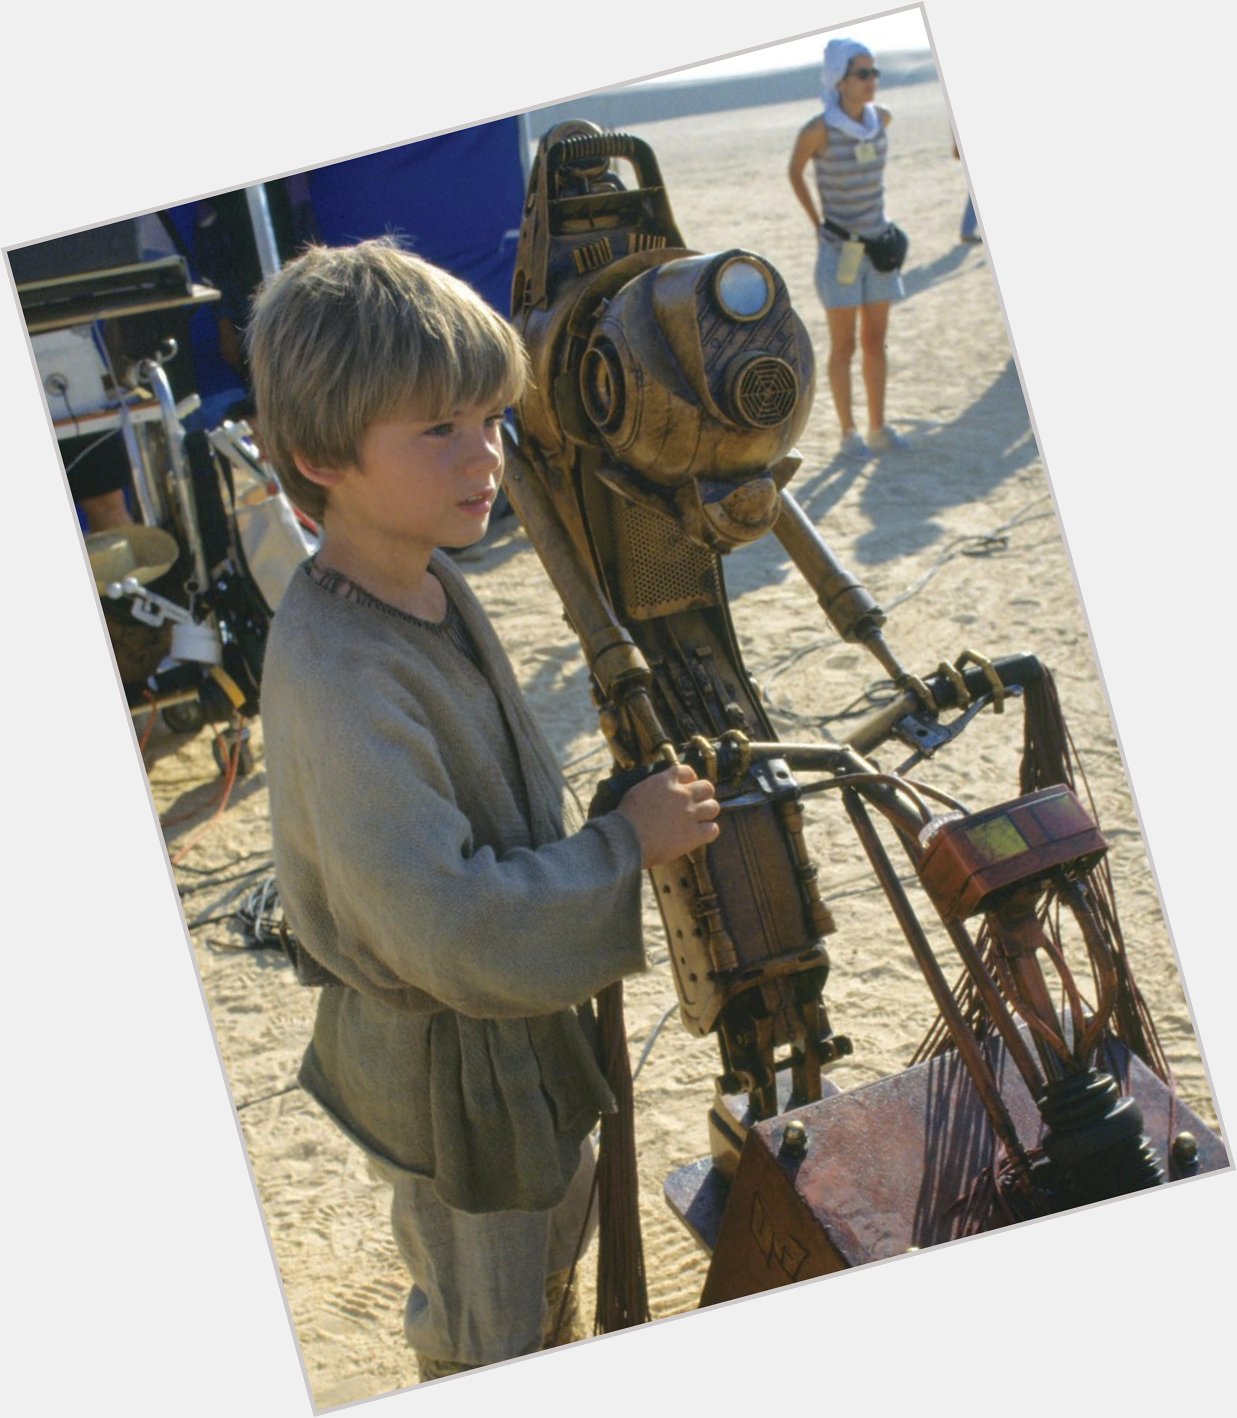 Happy birthday to jake lloyd! sending so much love and positivity to our baby anakin  